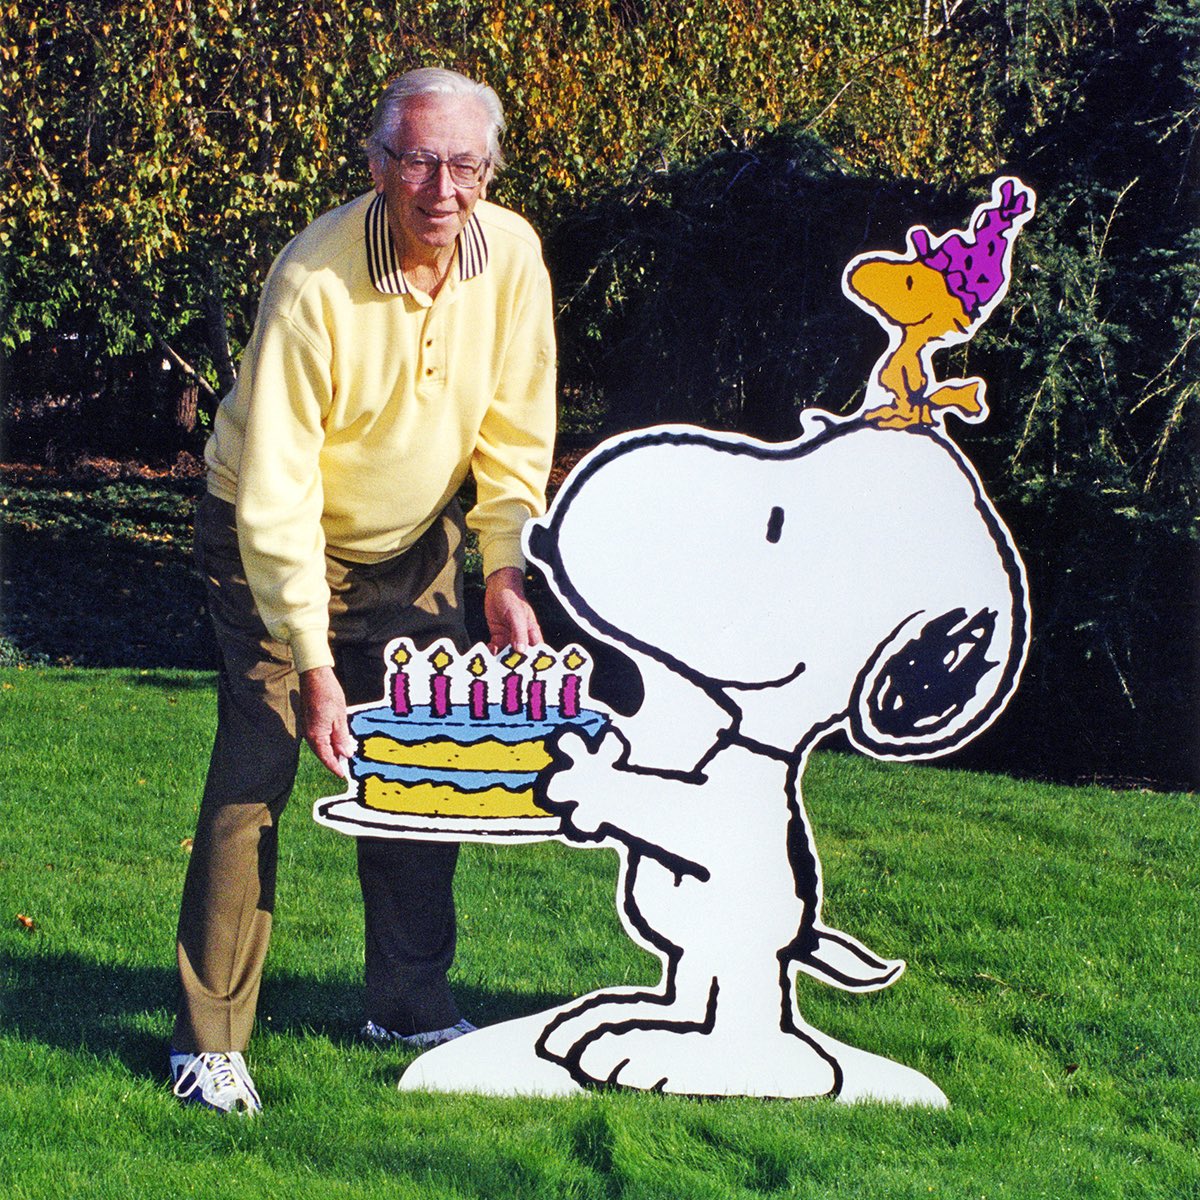 Happy 101st Birthday to Charles Schulz, the original creator of the Peanuts comic strip! 🥳🎉🎊💗

His leagacy of creating Charlie Brown along with the whole Peanuts Gang, is still iconic to this day! 💖🌟

#CharlesSchulz #Peanuts #CharlieBrown #Snoopy